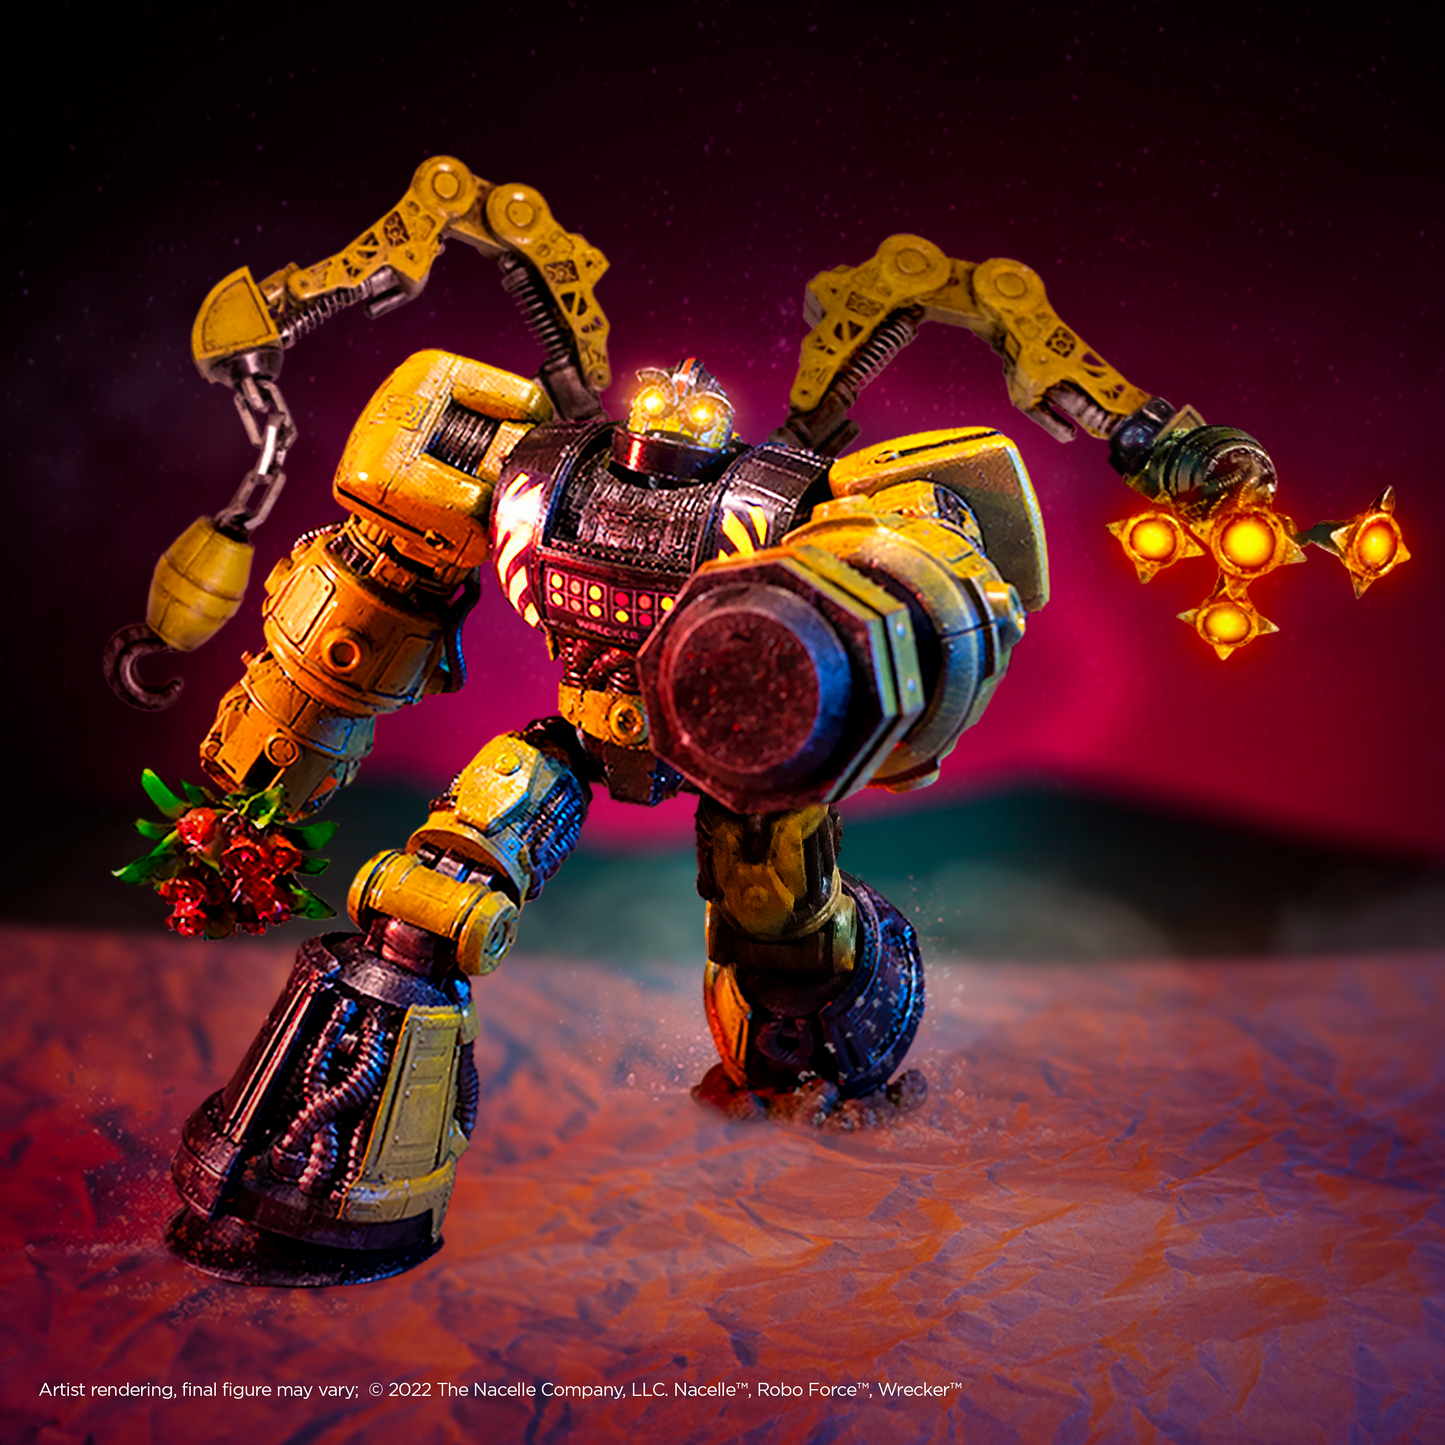 Wrecker collectible figure from Robo Force artist rendering